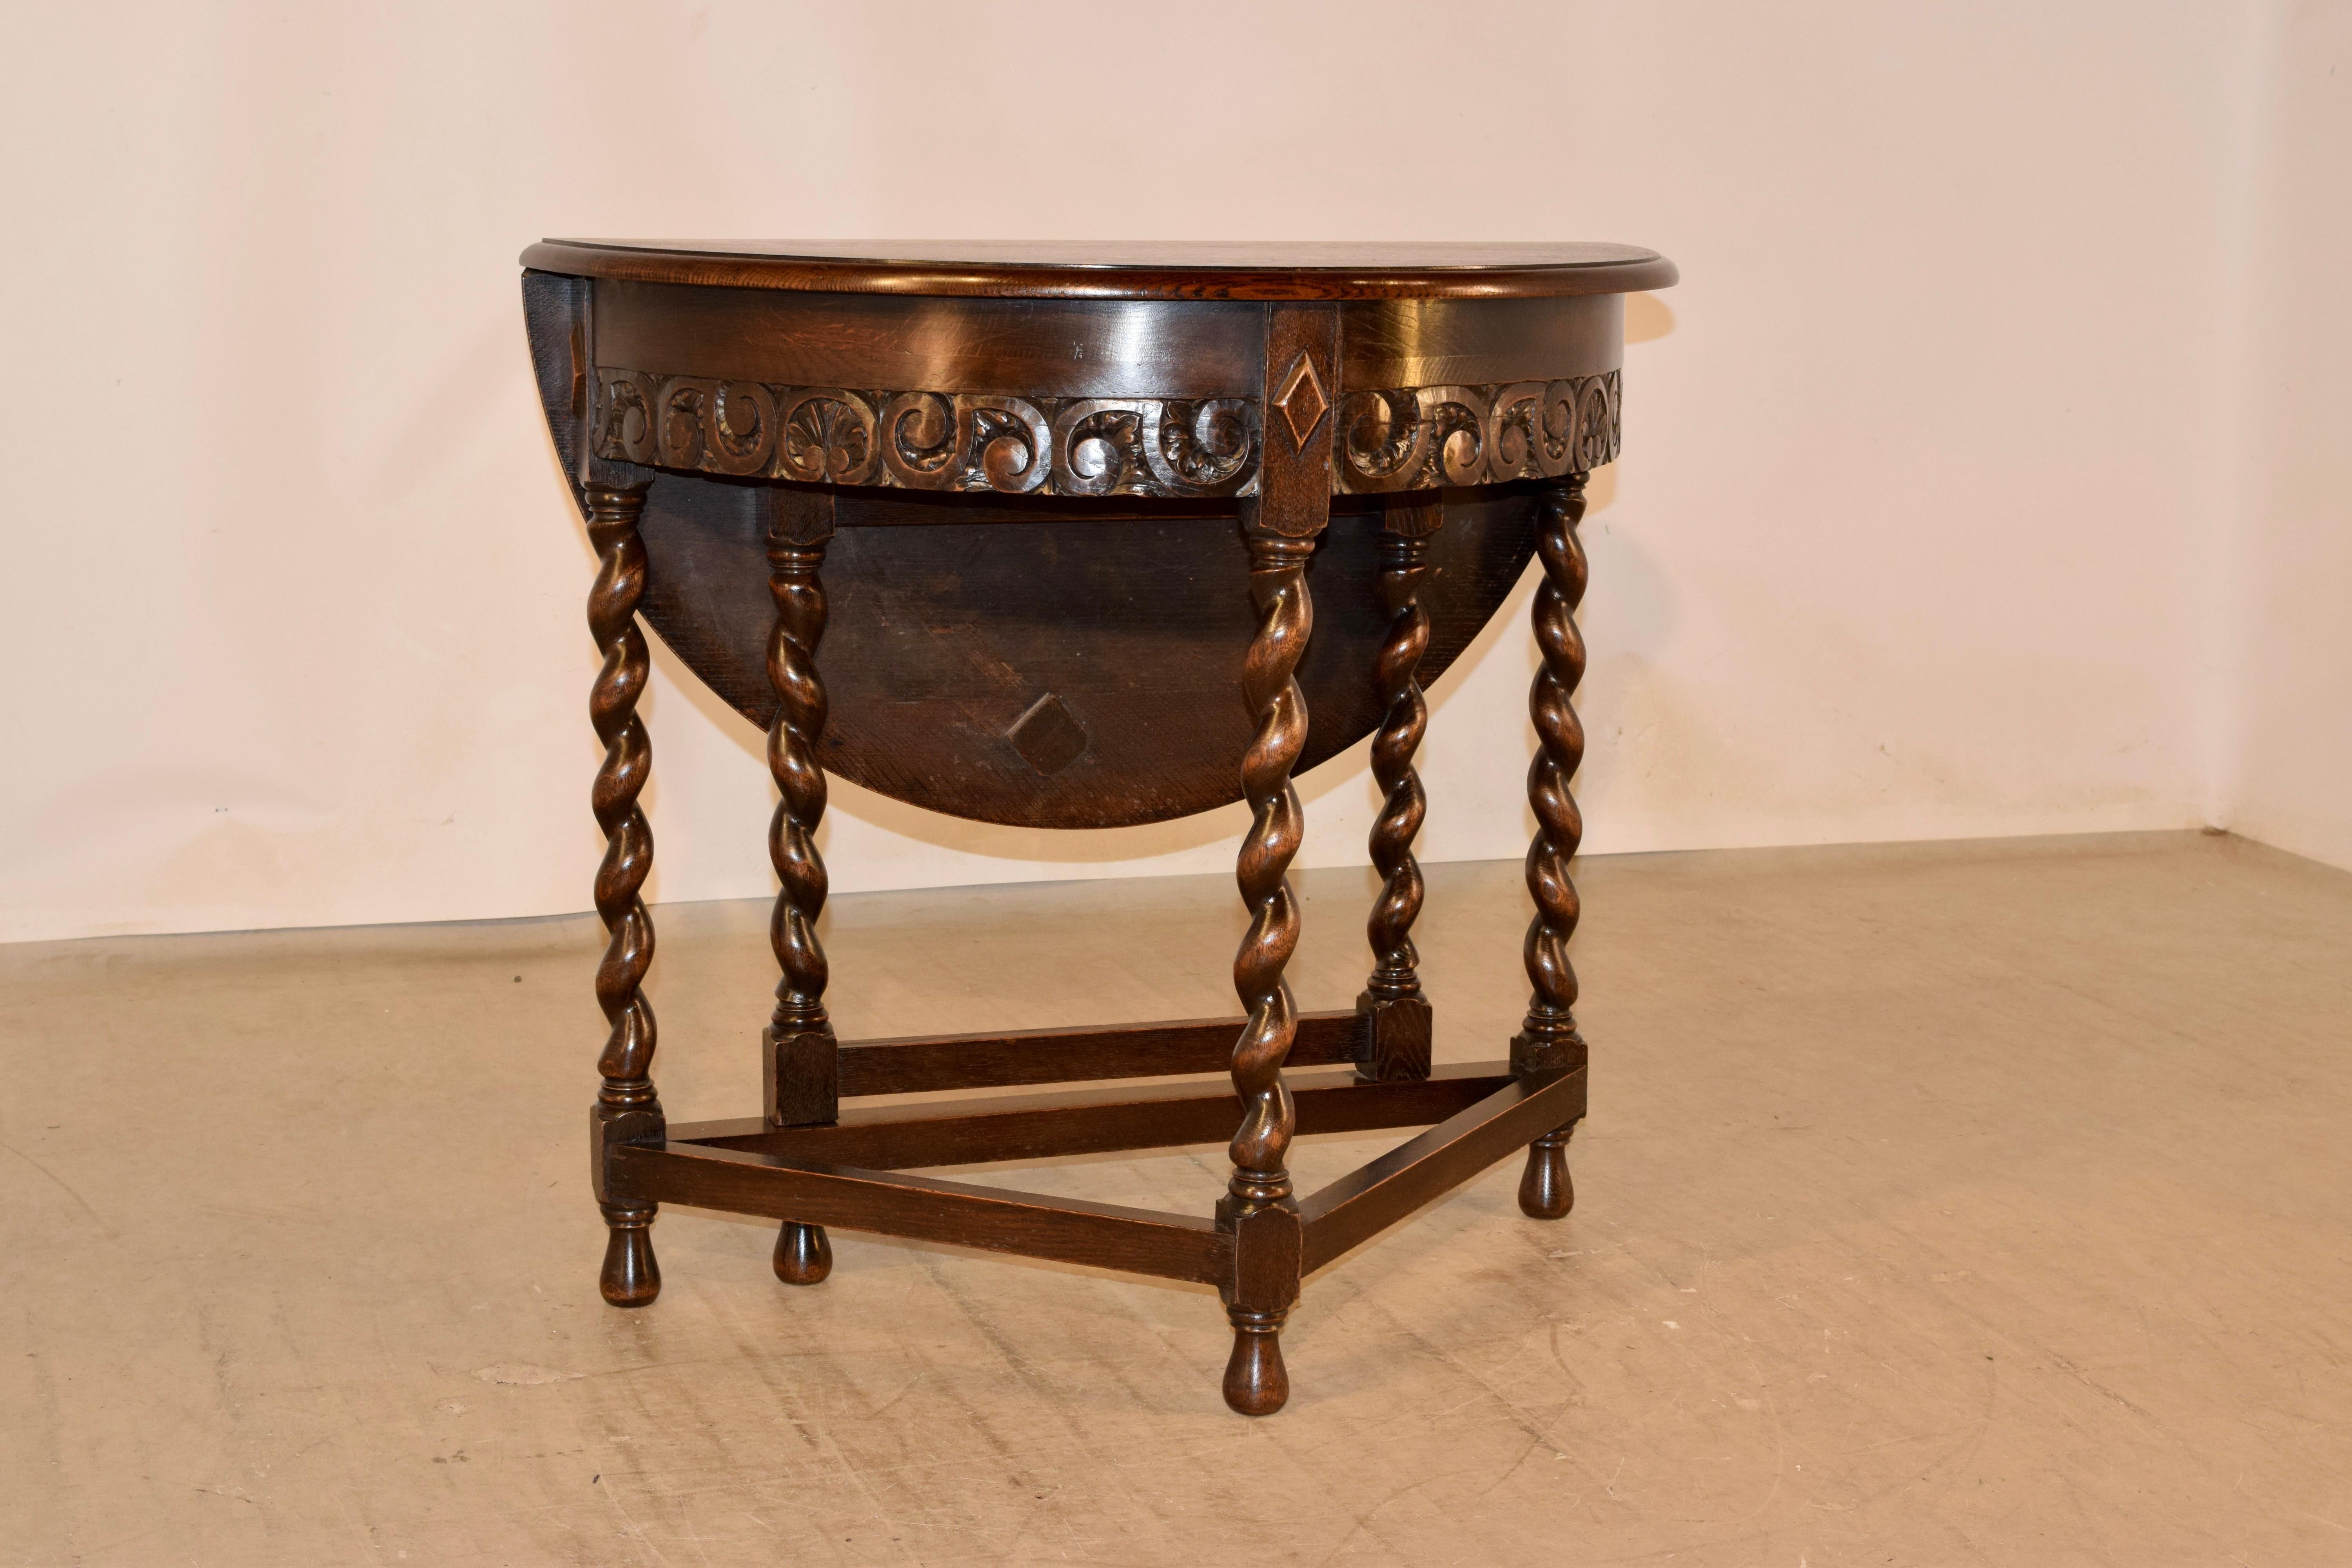 Late 19th century English oak Demi-lune table with a dropped leaf. The top is round when the leaf is raised and measures 33 inches in diameter. The top has a beveled edge and follows down to an apron with a hand carved bordered lower edge and is